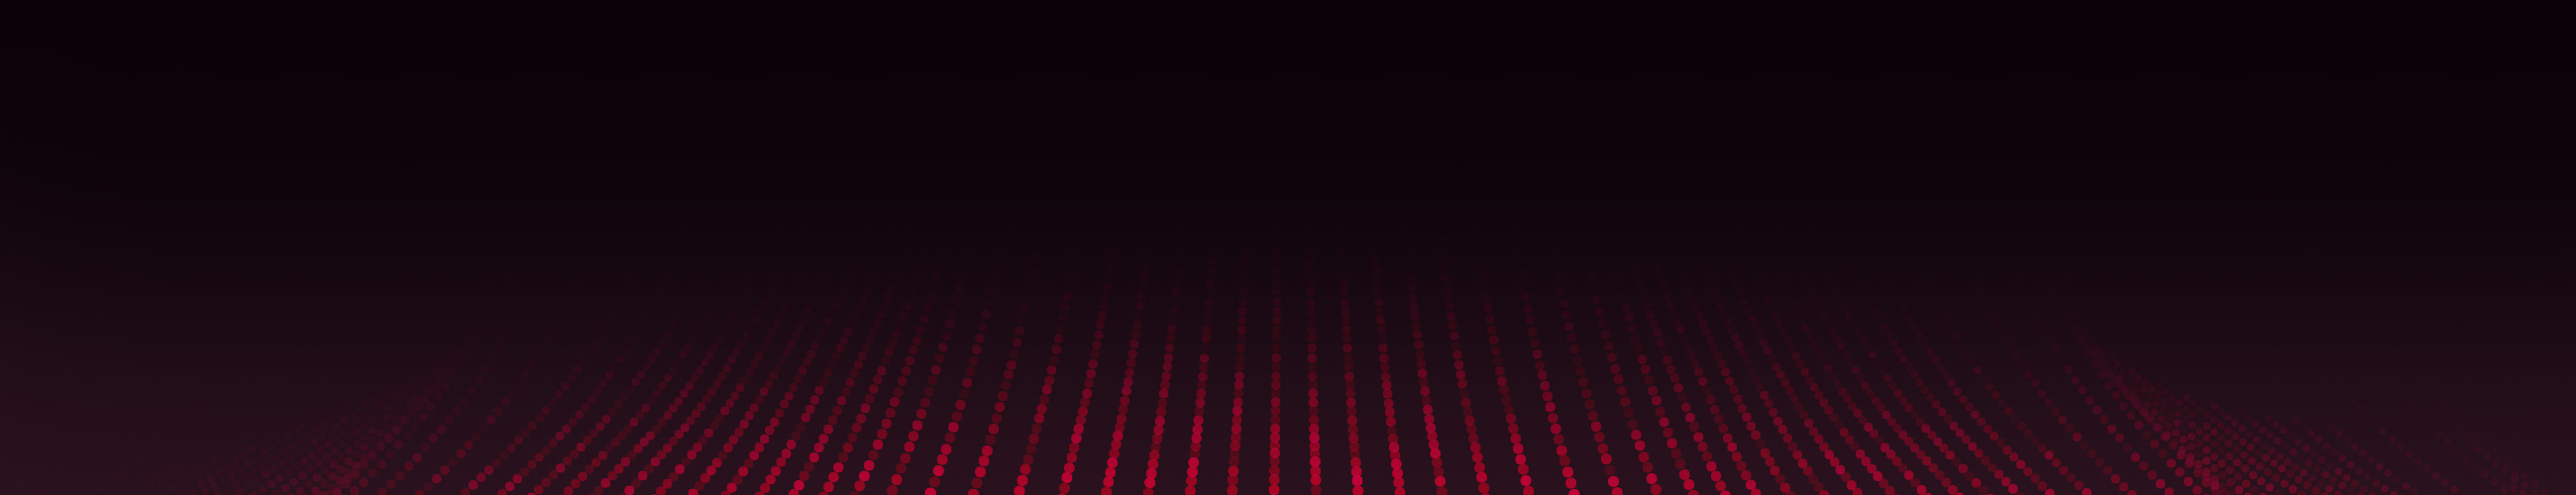 Dark Background with red wave lines